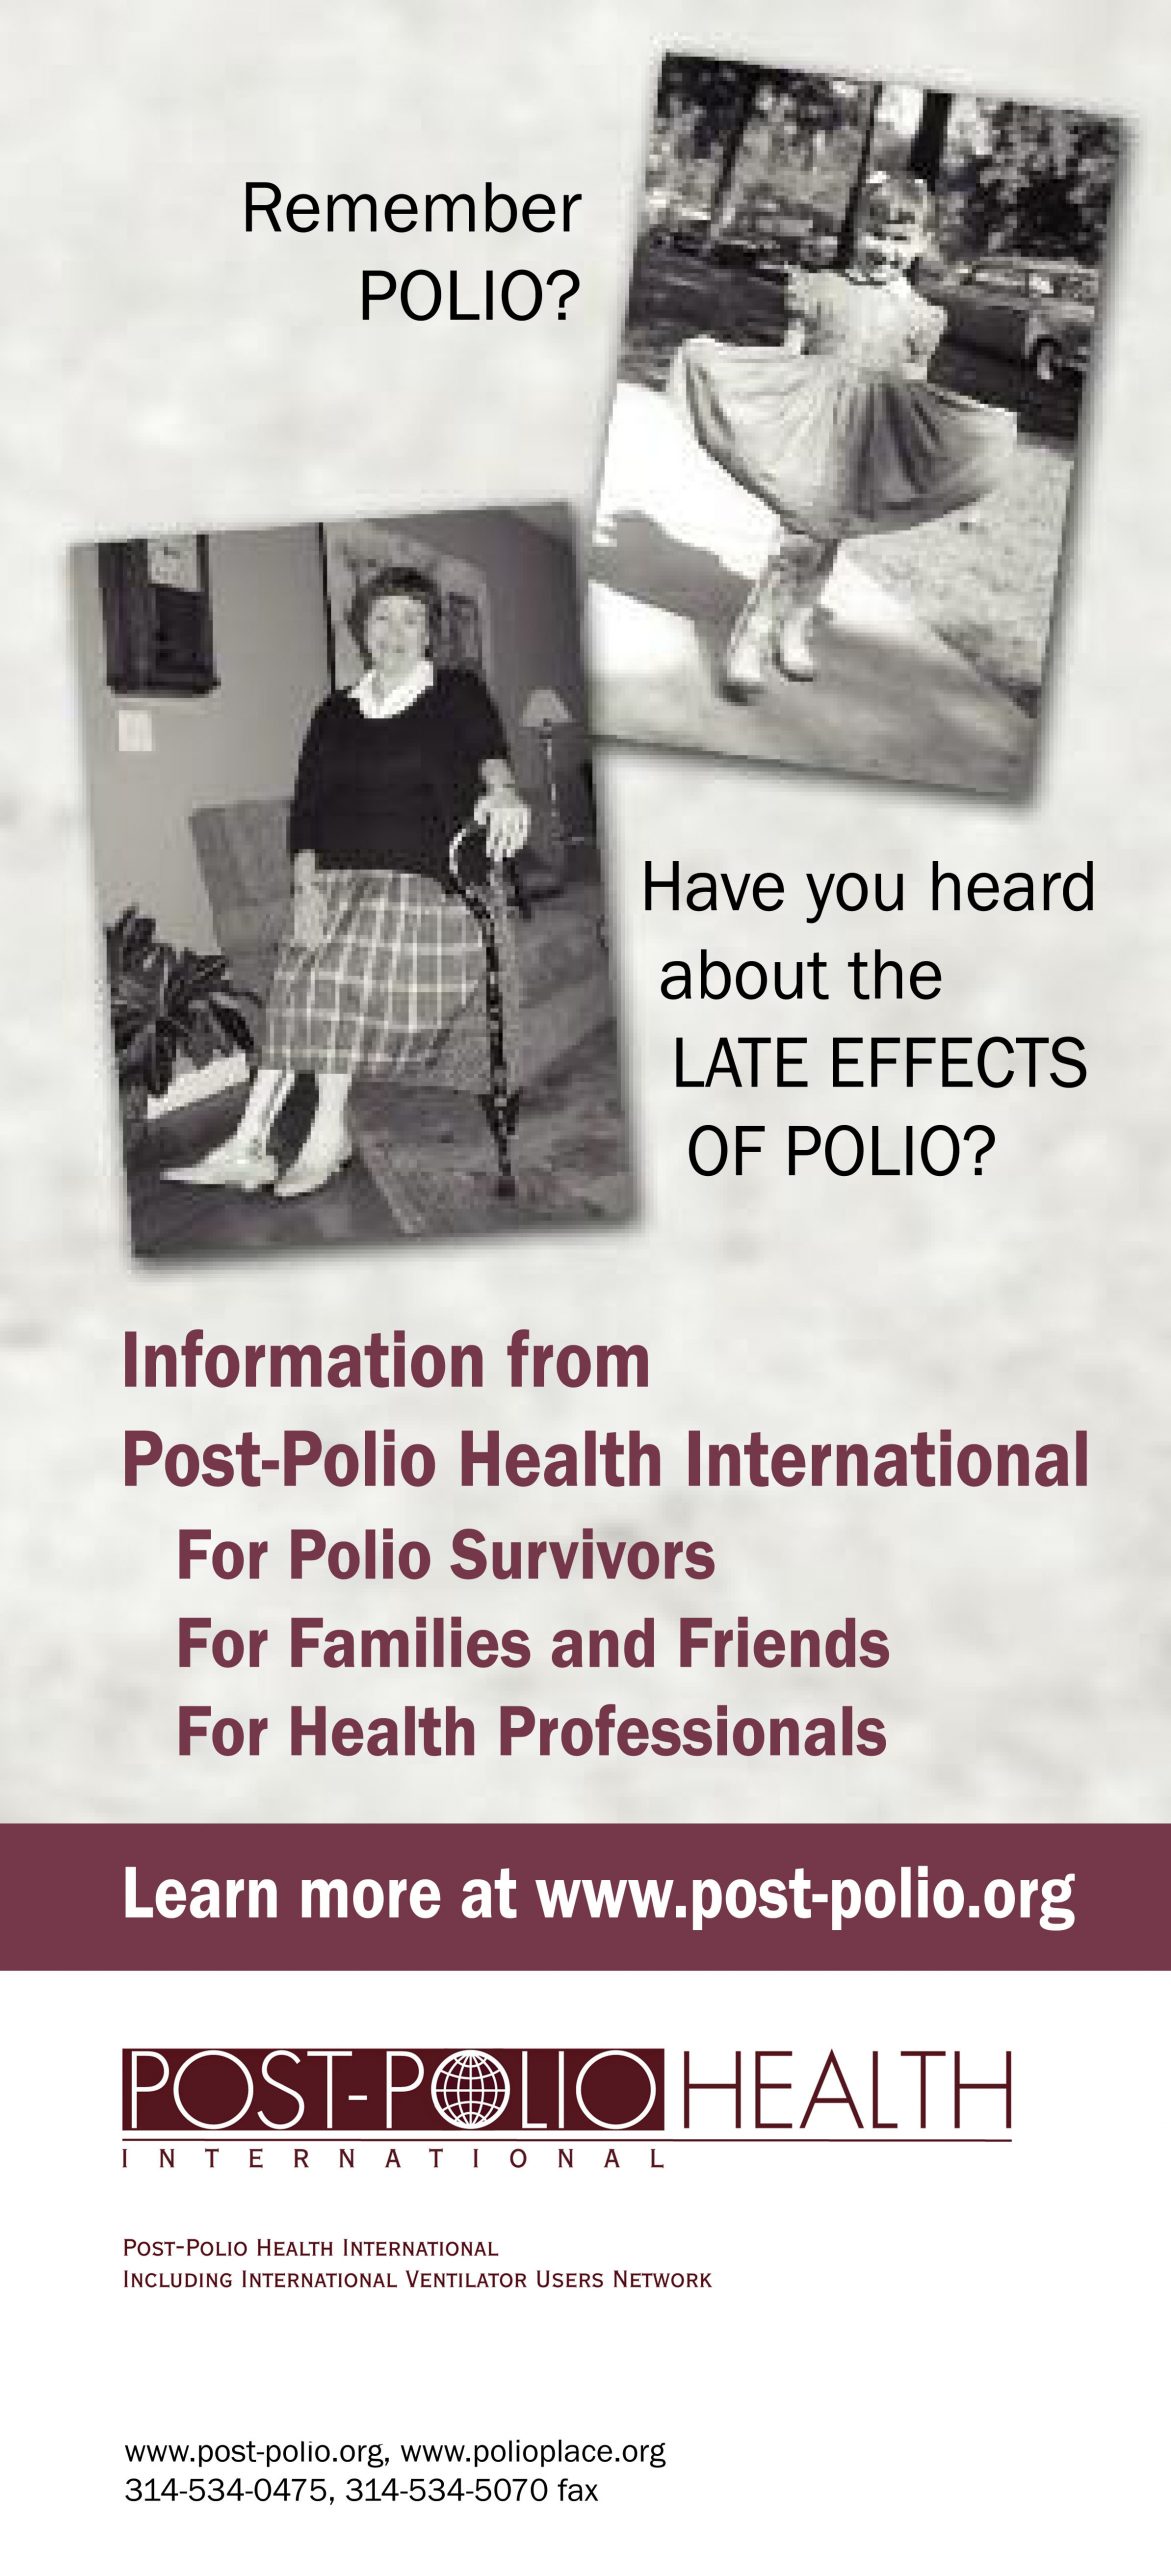 About Post-Polio